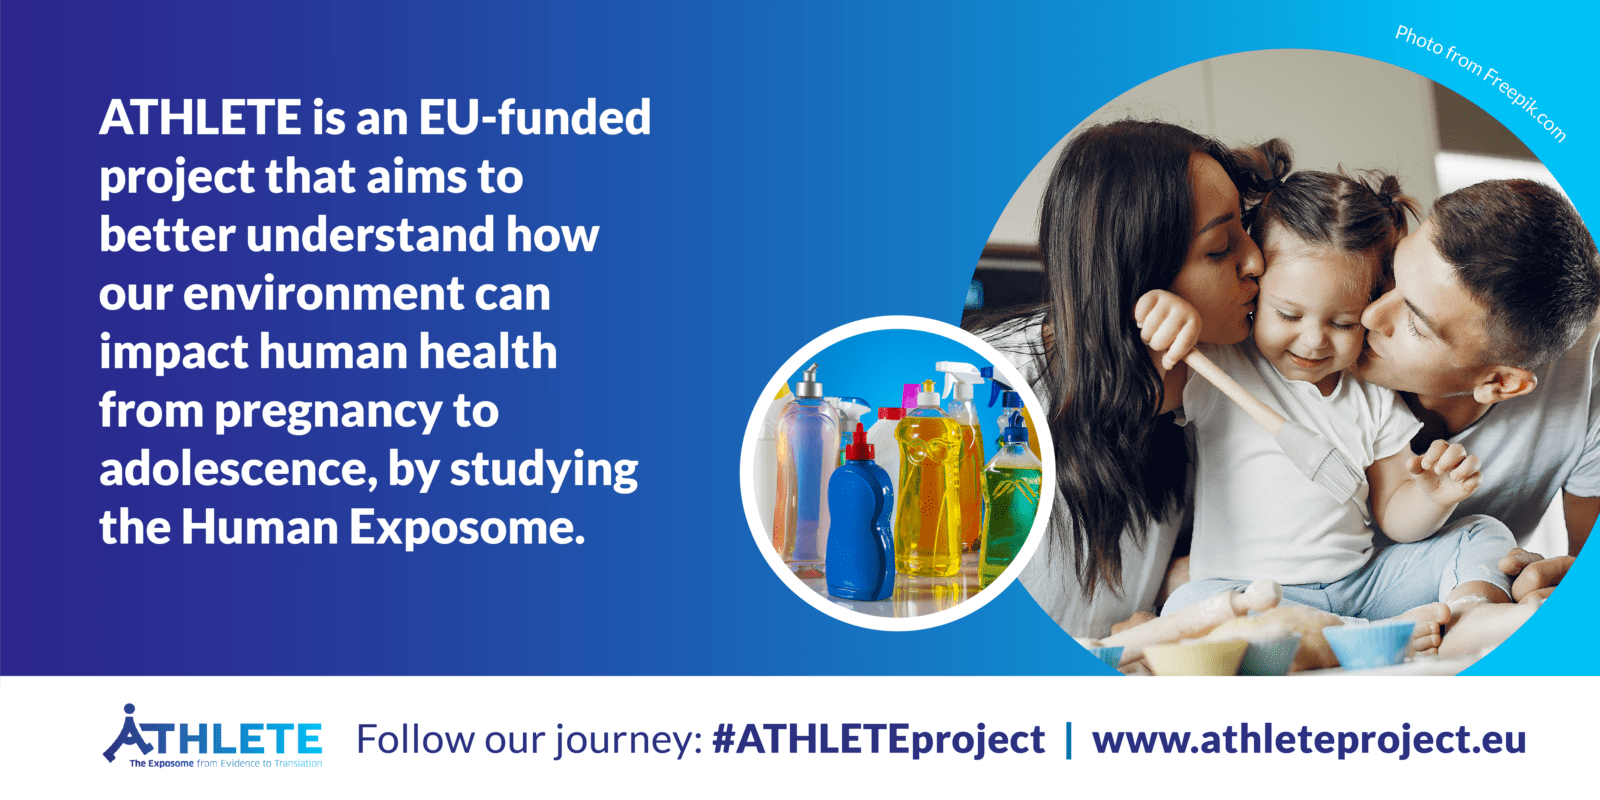 The ATHLETE project holds its fifth consortium meeting – updates on exposome research and early life exposure